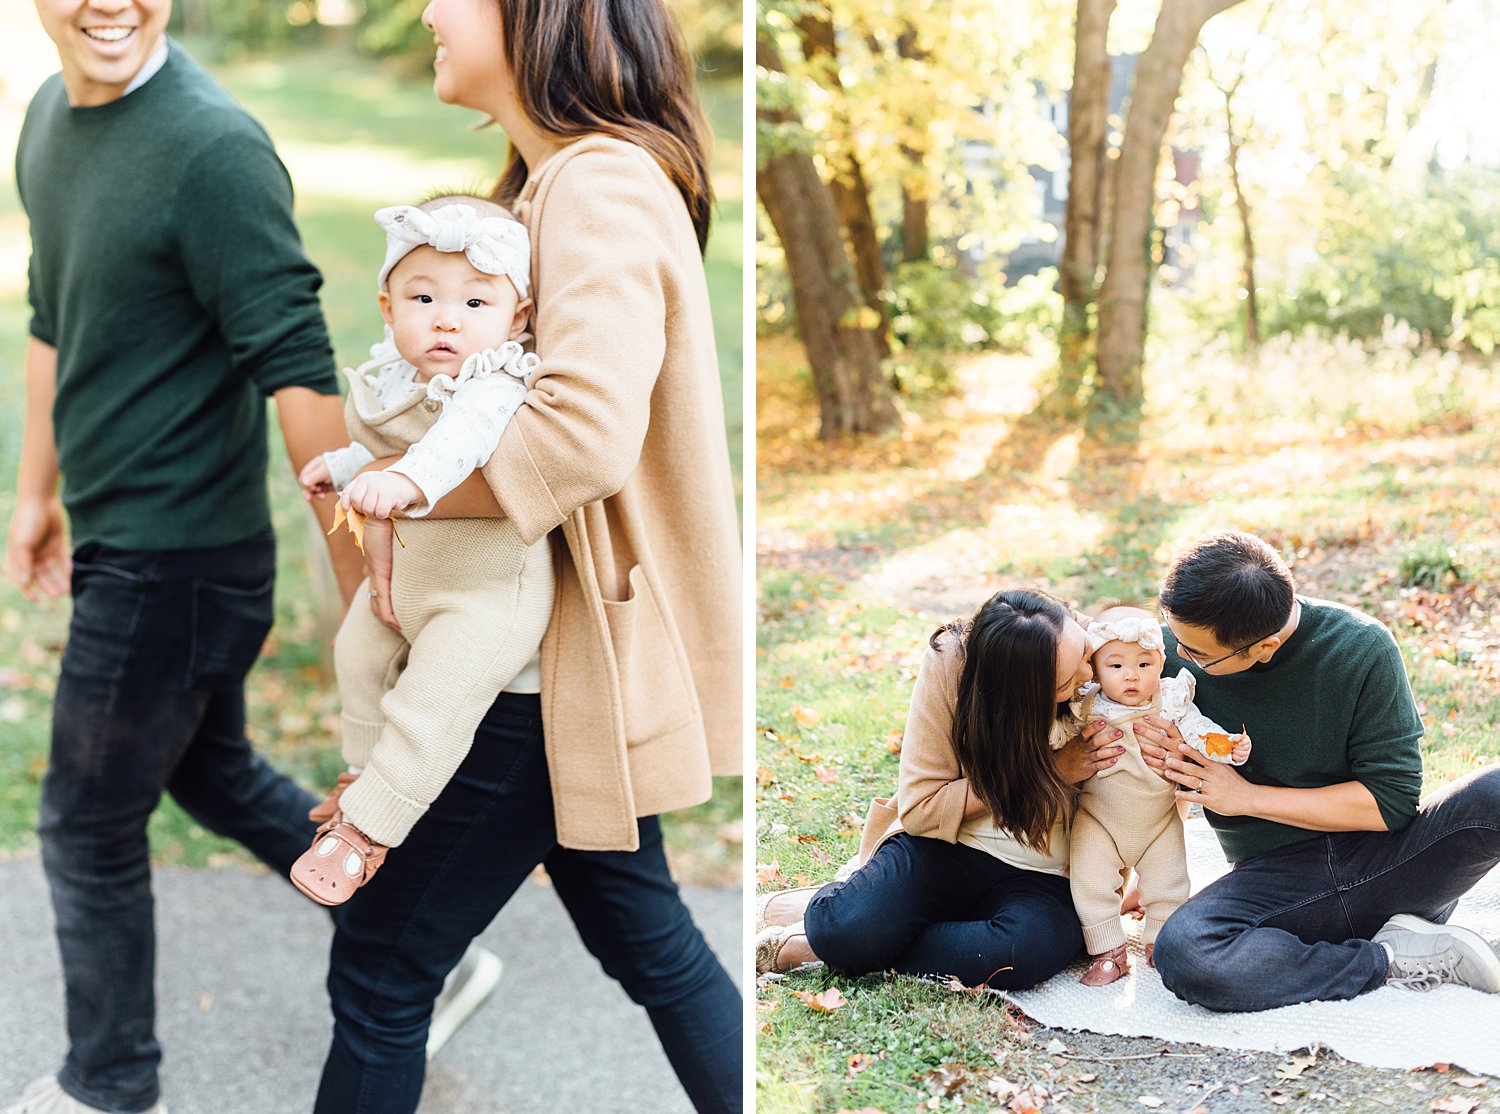 November Mini-Sessions - Silver Spring Maryland Family Photographer - Alison Dunn Photography photo